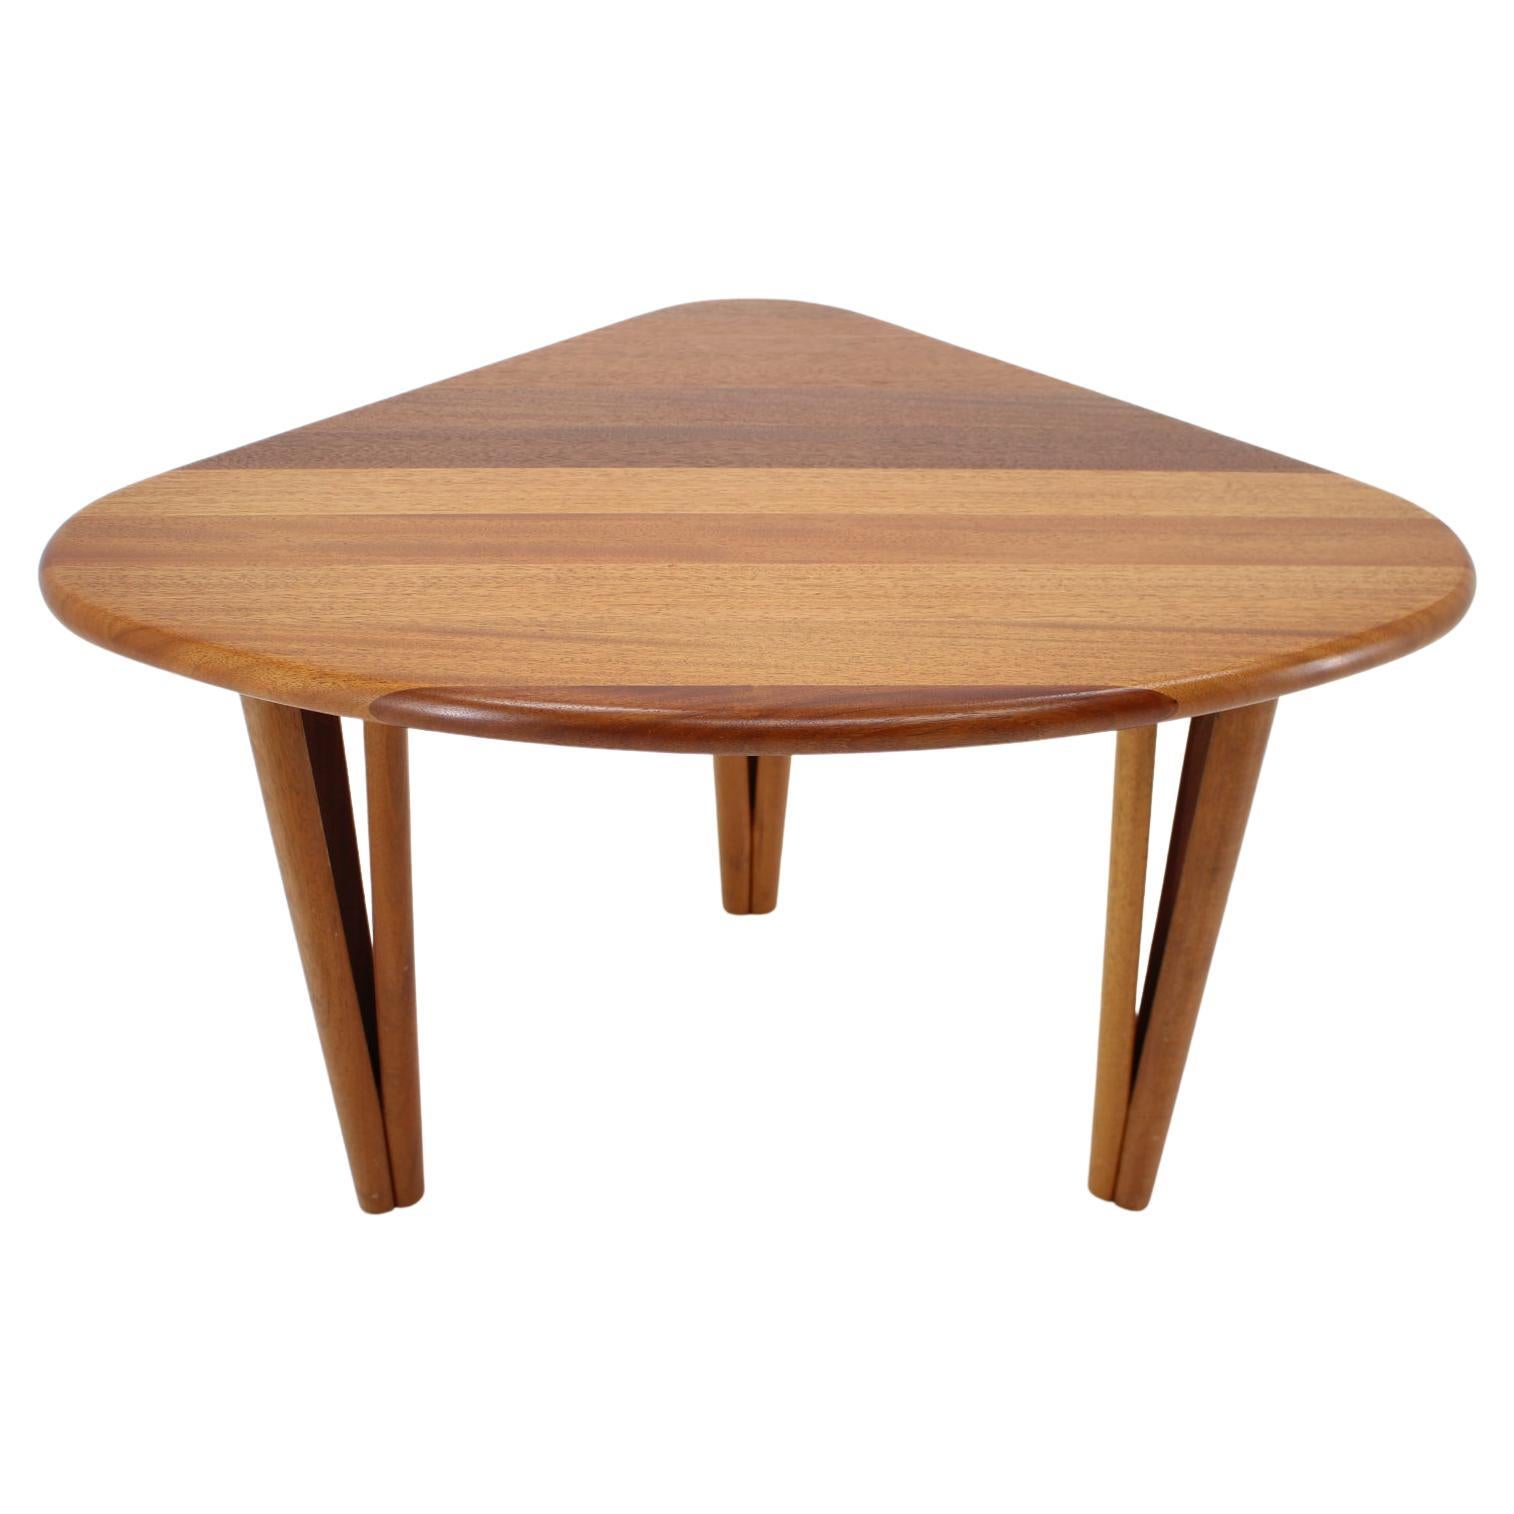 1970s Organic Solid Teak Coffee Table, Denmark For Sale